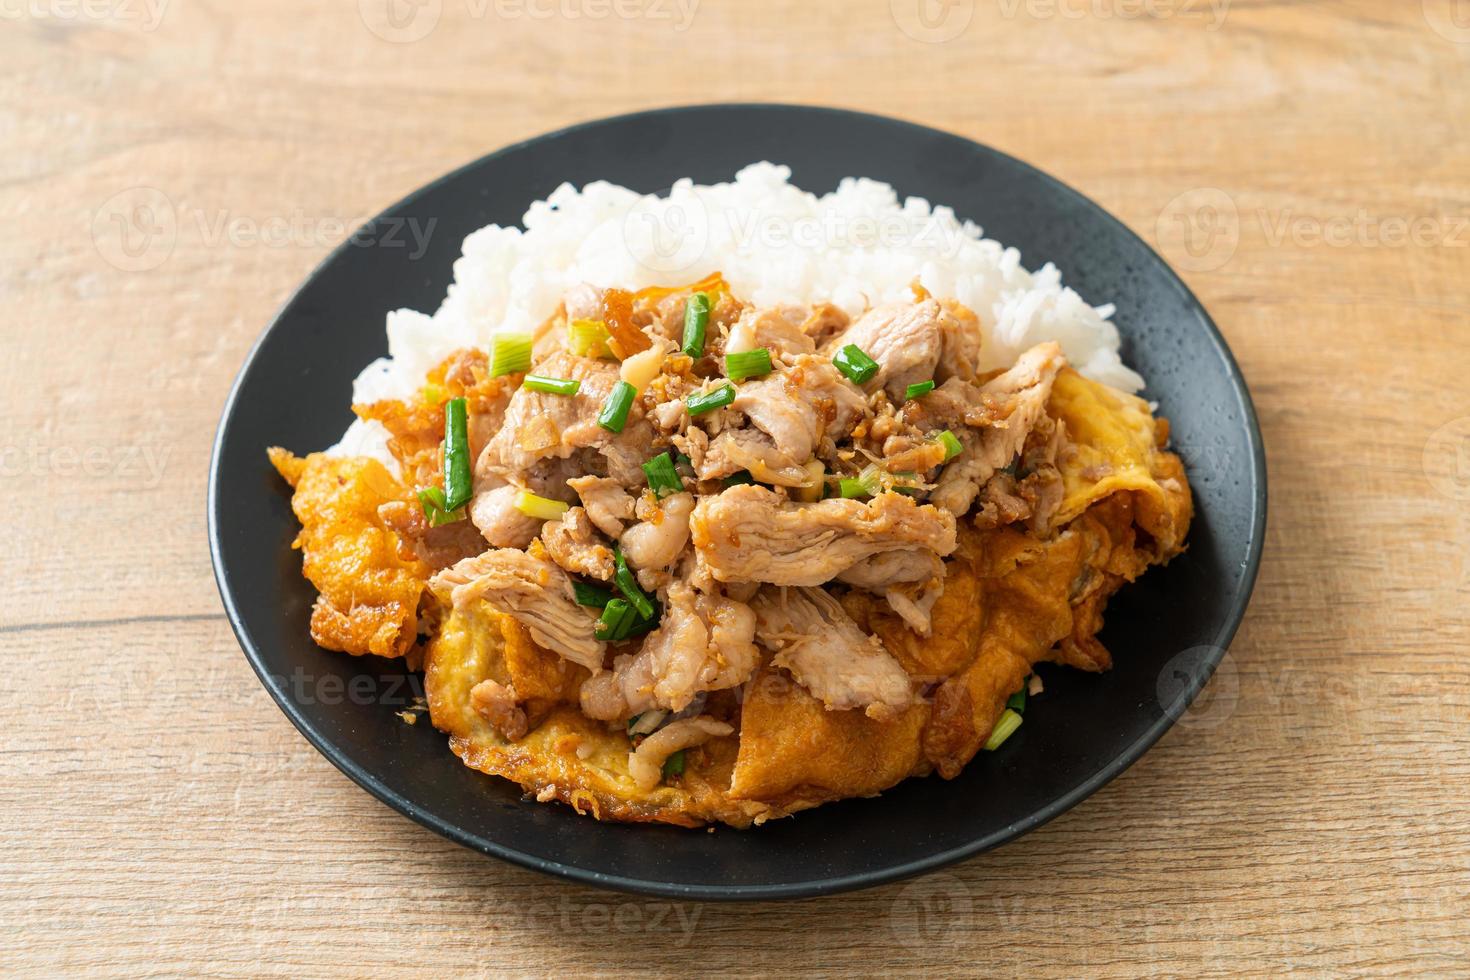 Stir-fried pork with garlic and egg topped on rice - Asian food style photo